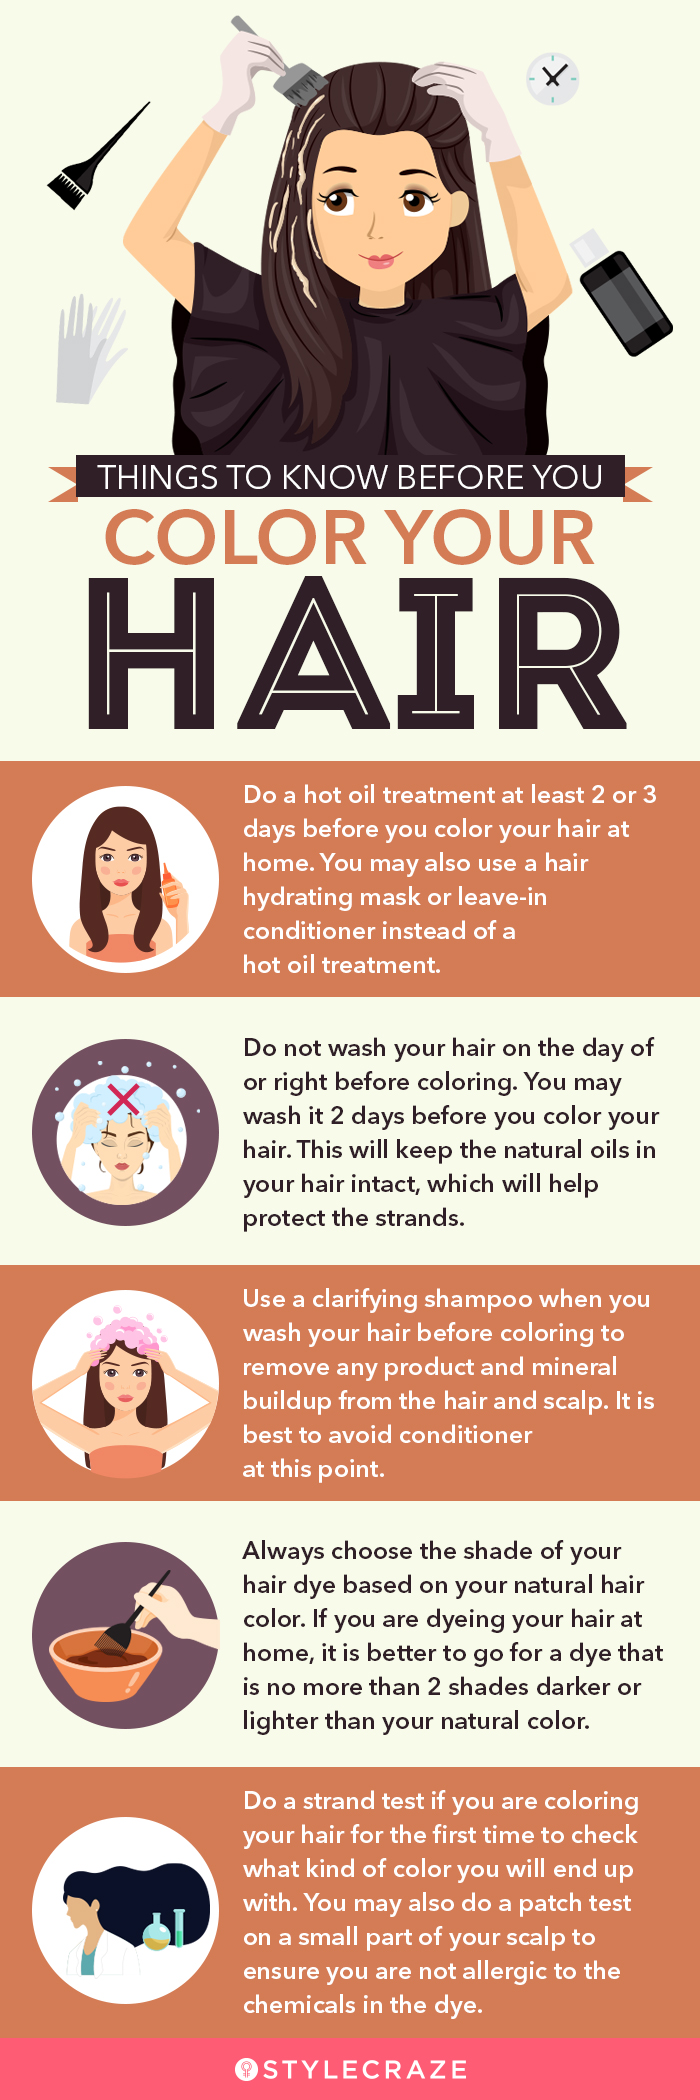 things to know before you color your hair [infographic]